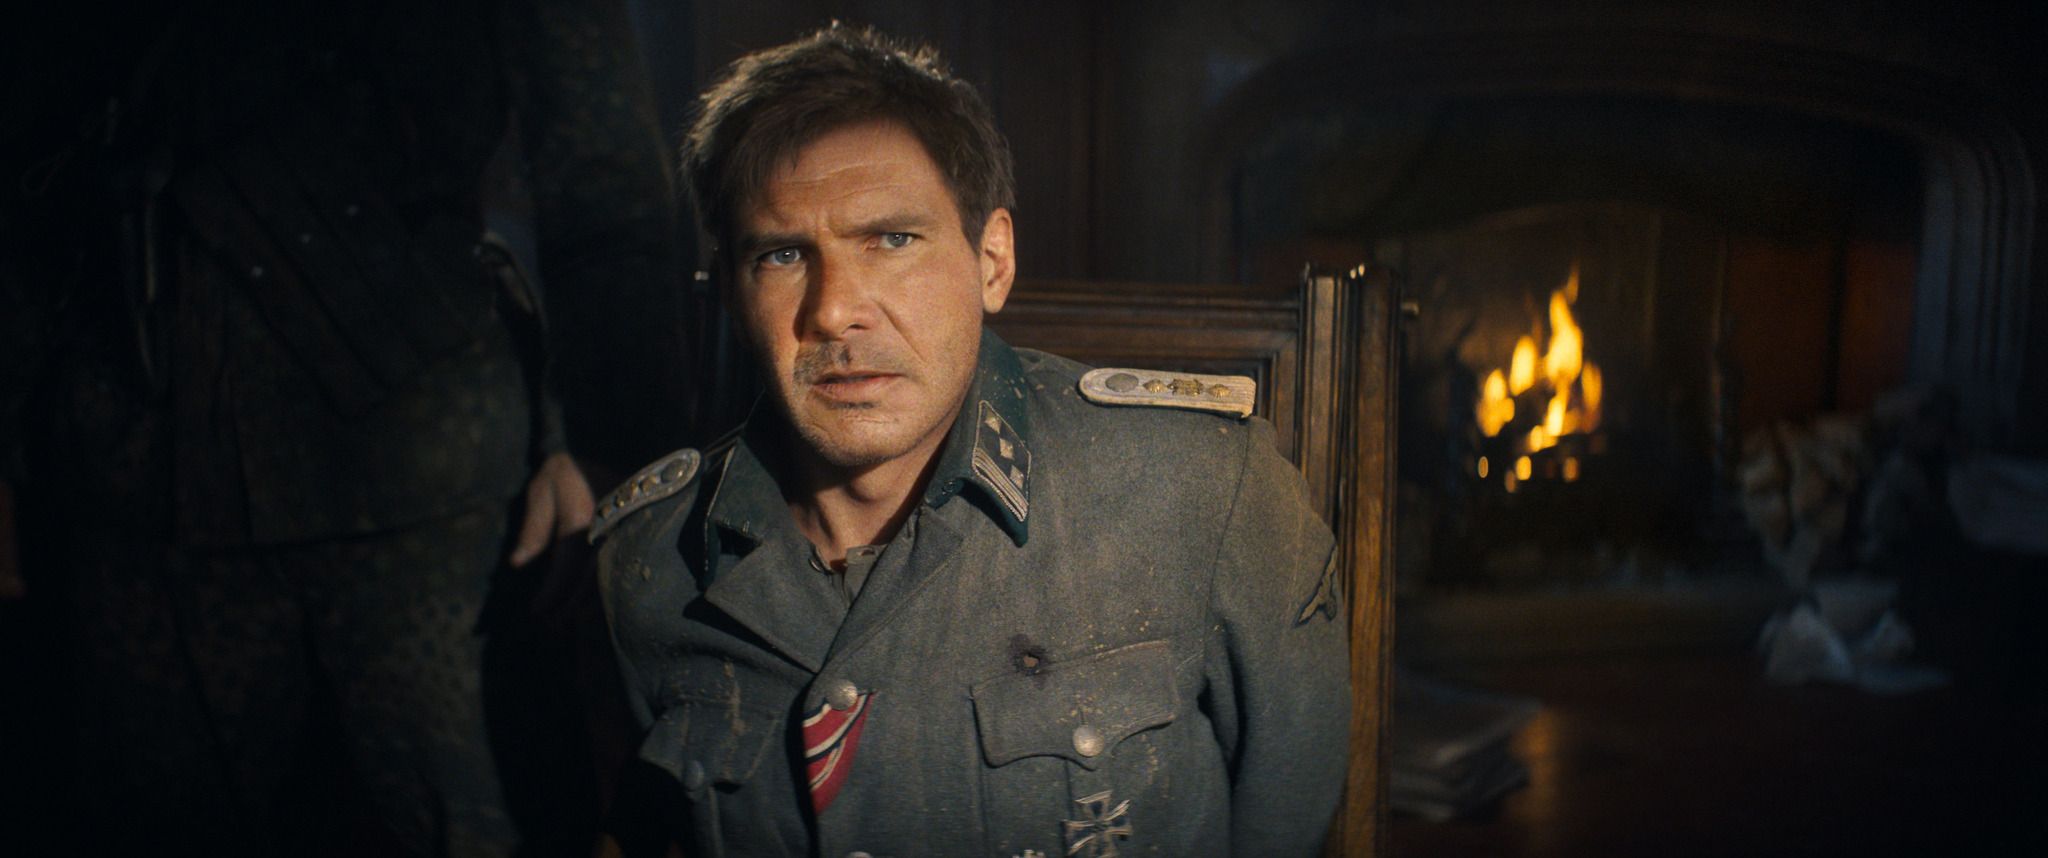 Indiana Jones and the Dial of Doom poster features Harrison Ford back